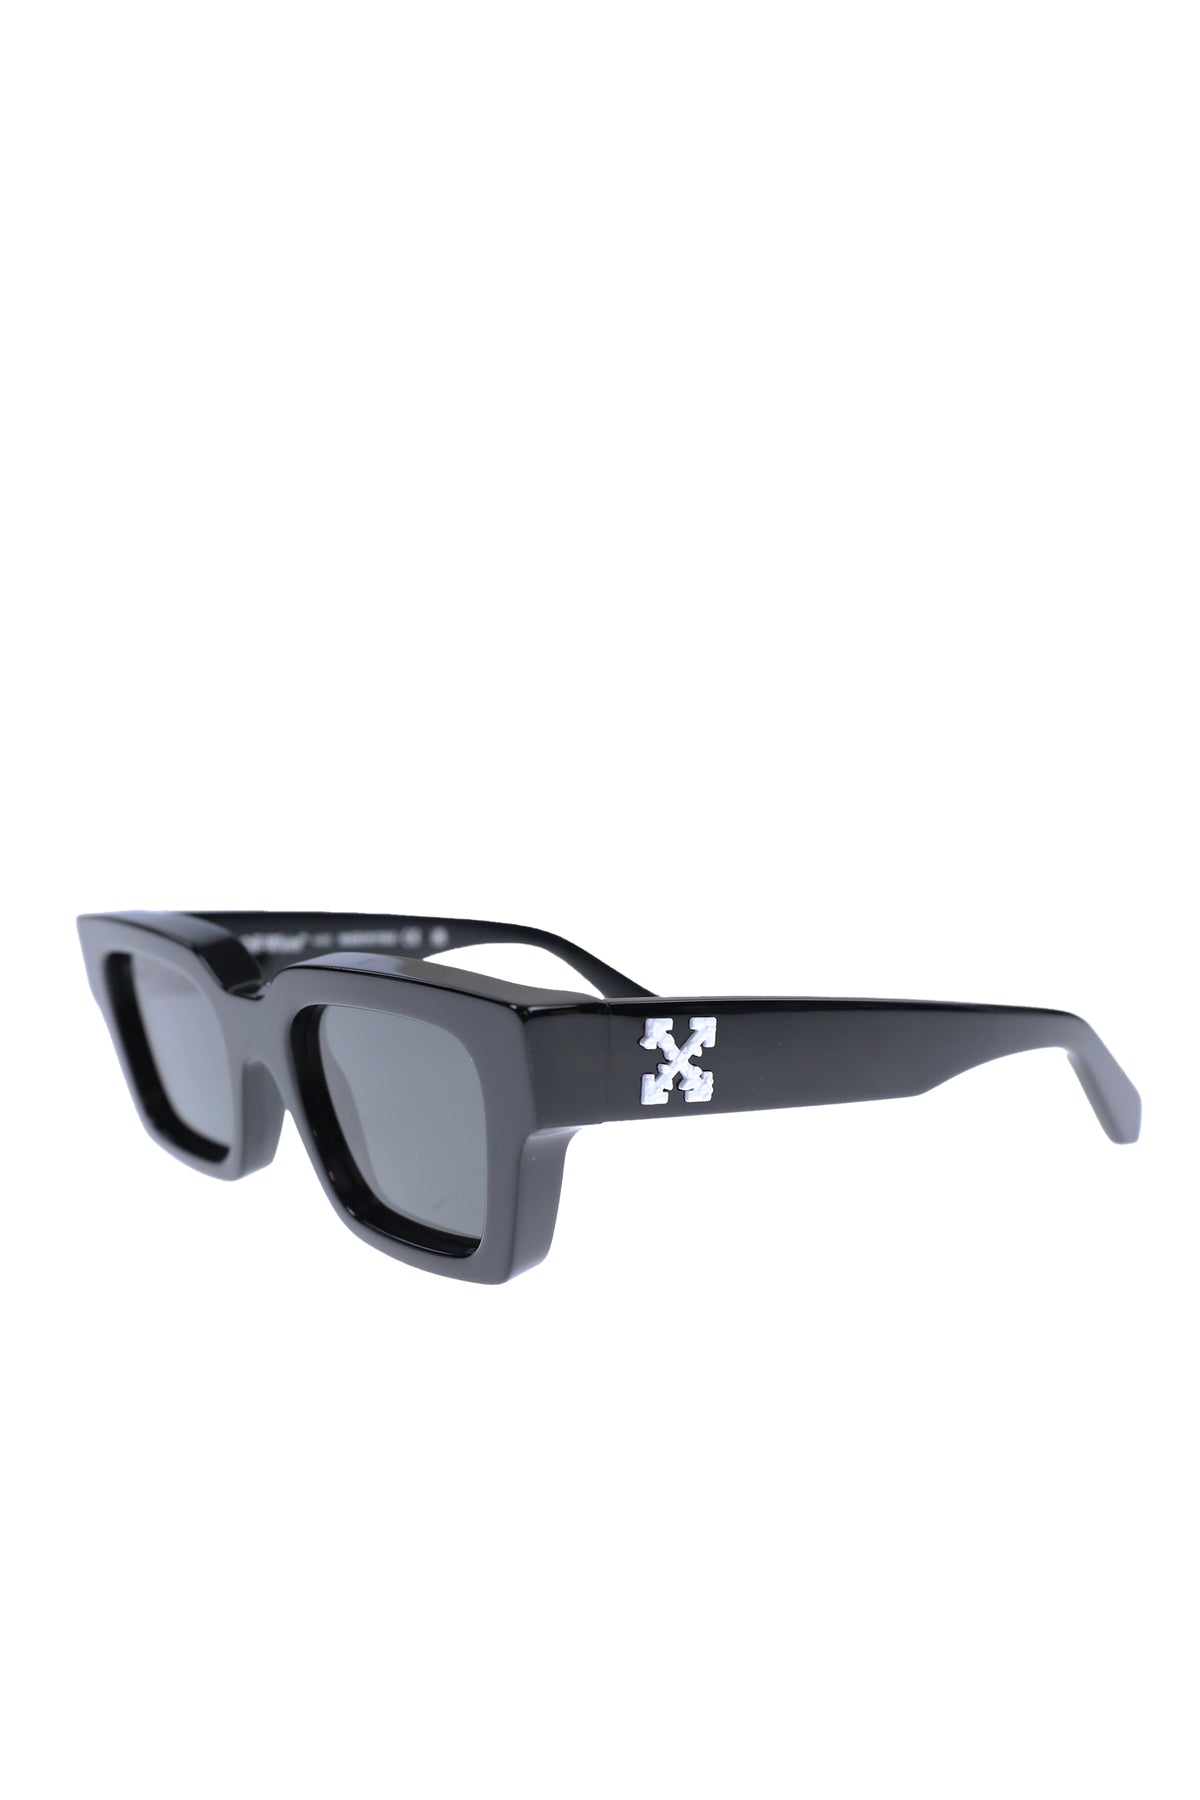 Off-White VIRGIL SUNGLASSES / BLK DGRY